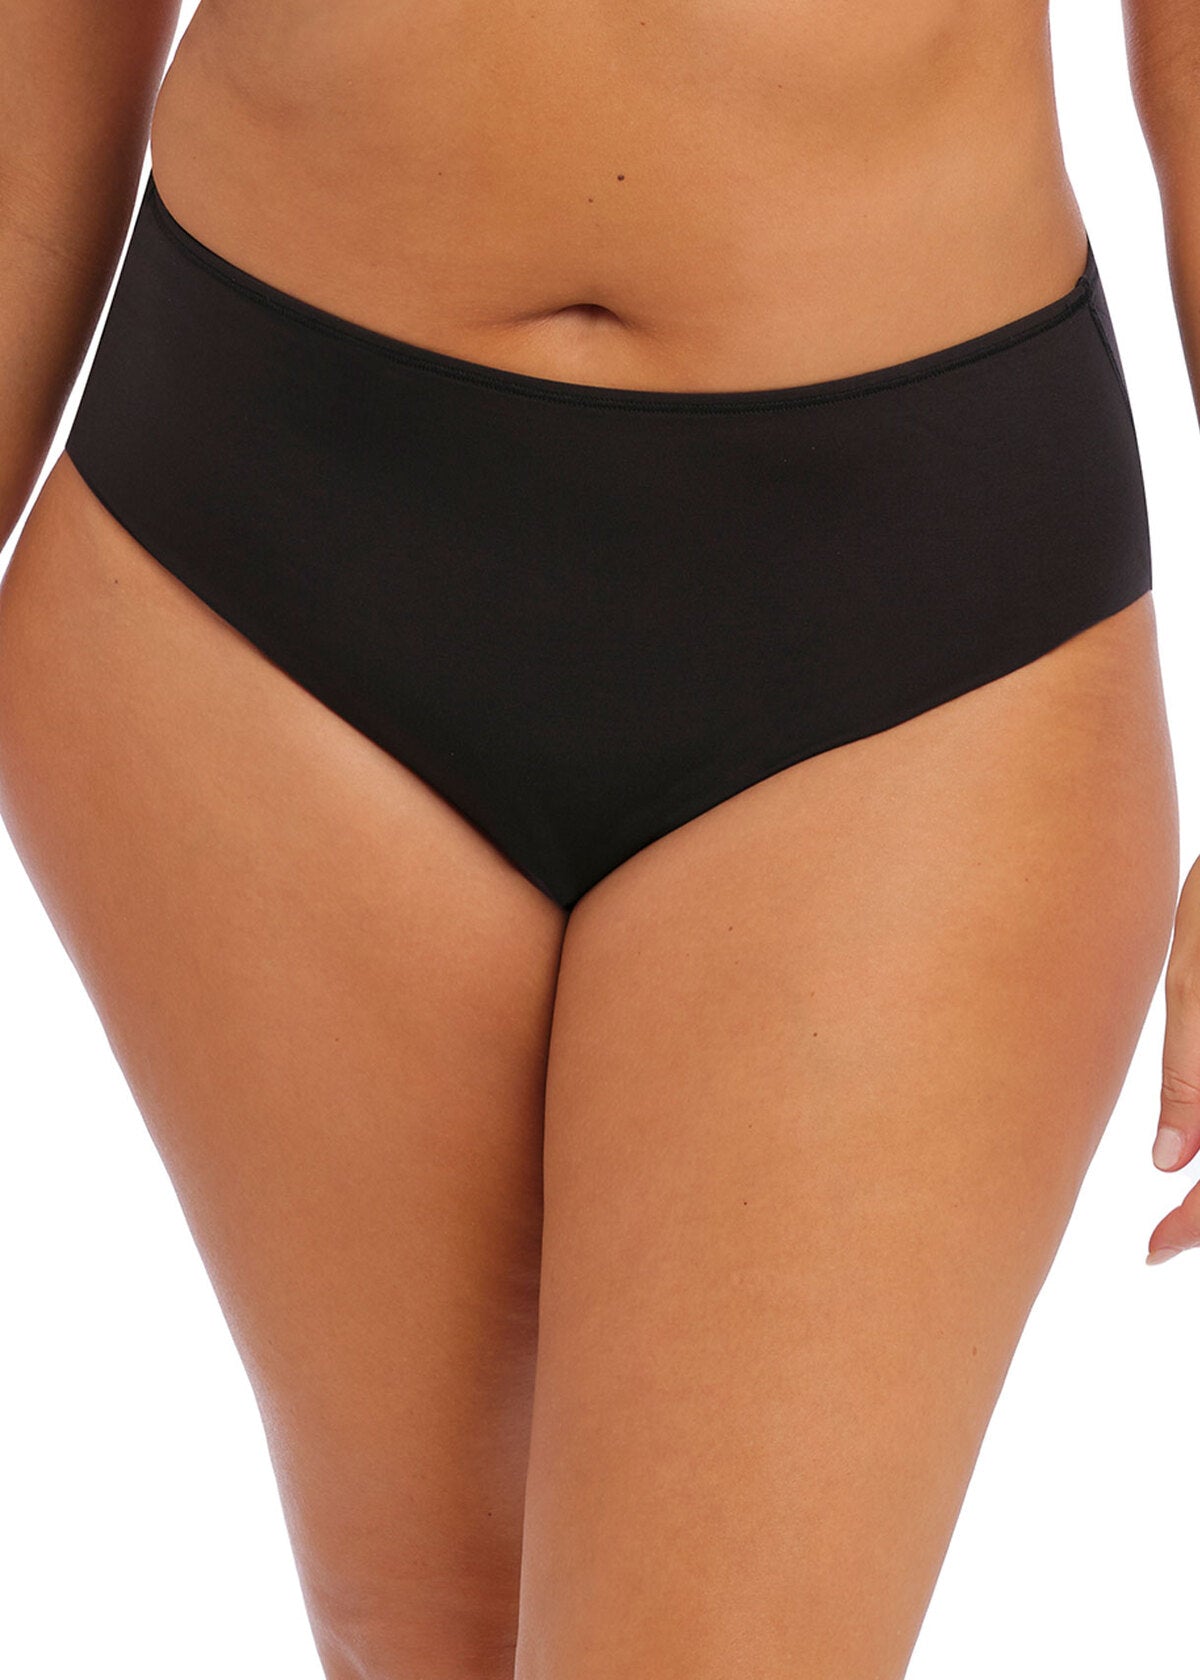 Experience all day comfort with the Smooth Full Brief Panty from Elomi in black